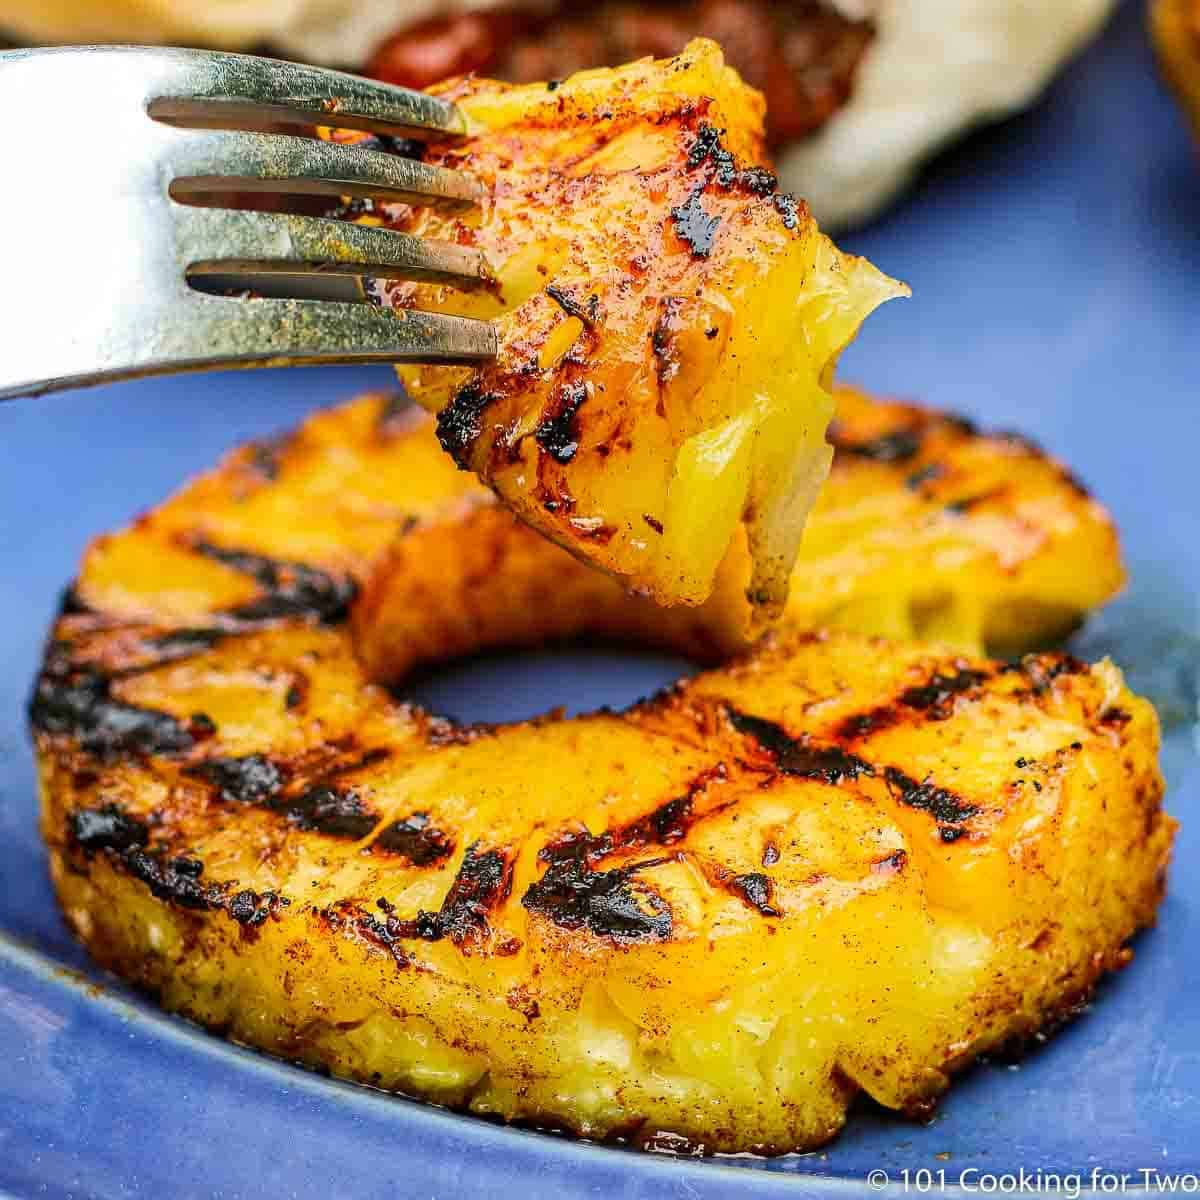 Closeup of grilled pineapple on a blue plate.